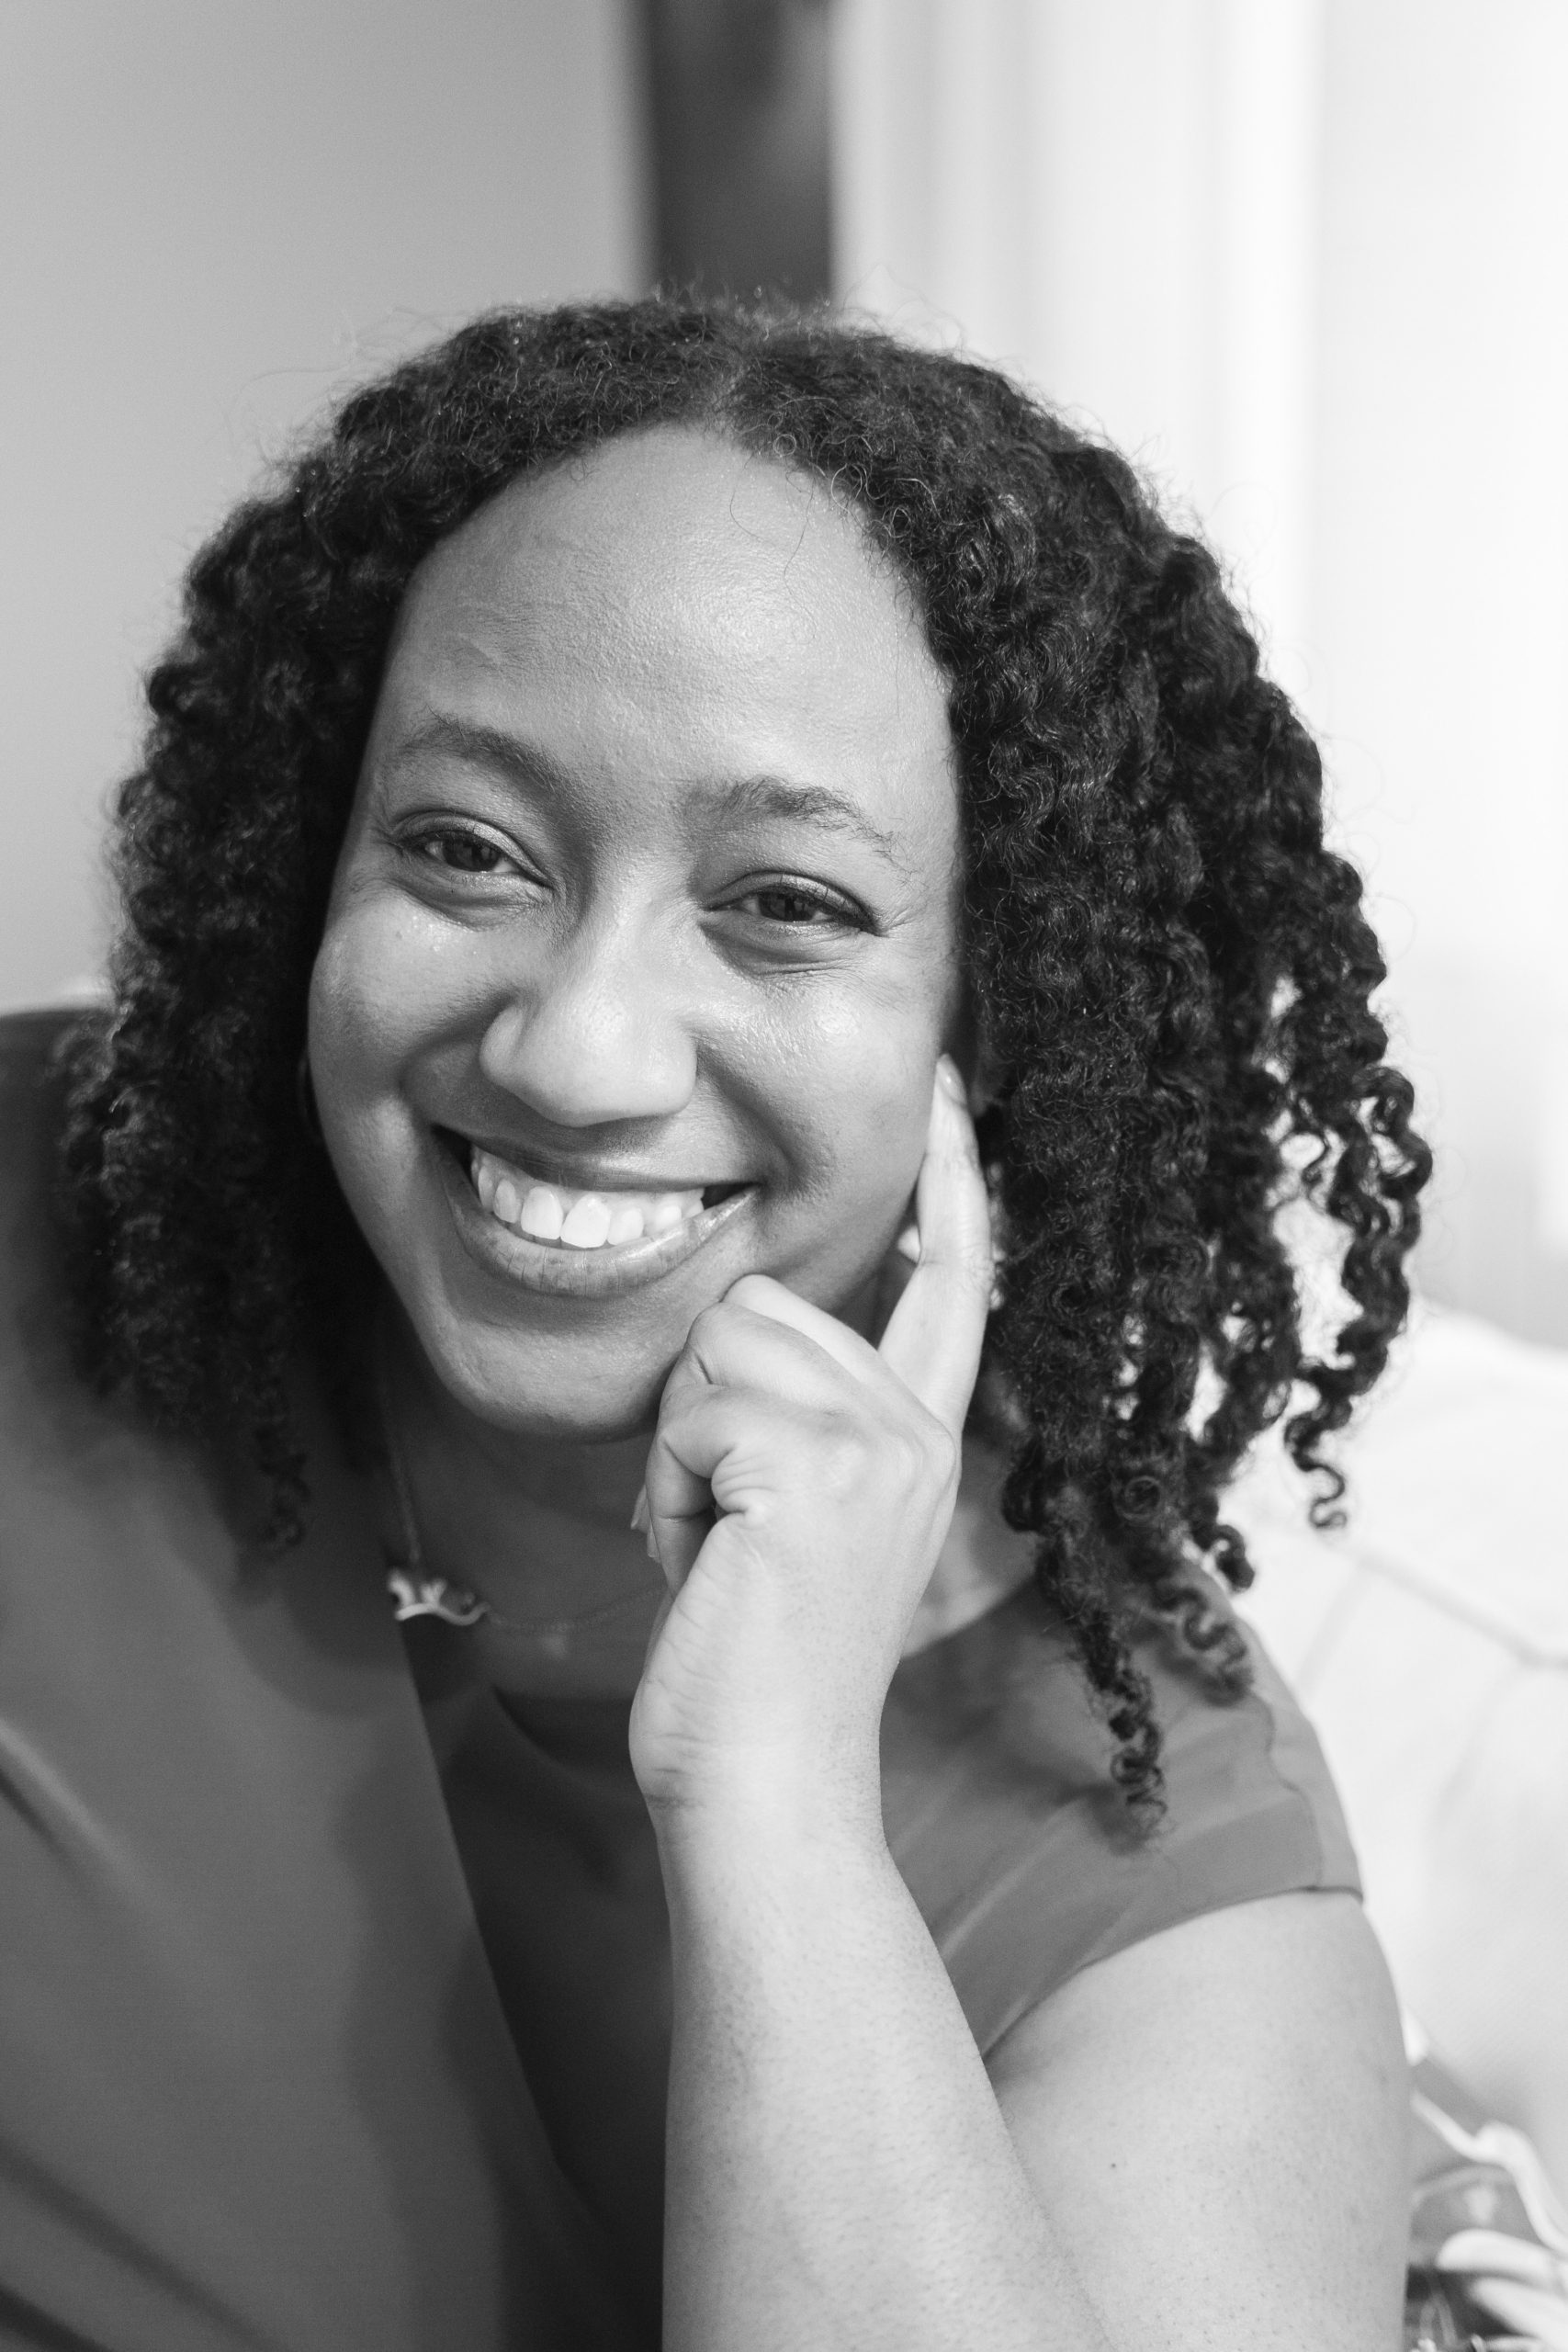 image of a smiling black woman with twisted braids